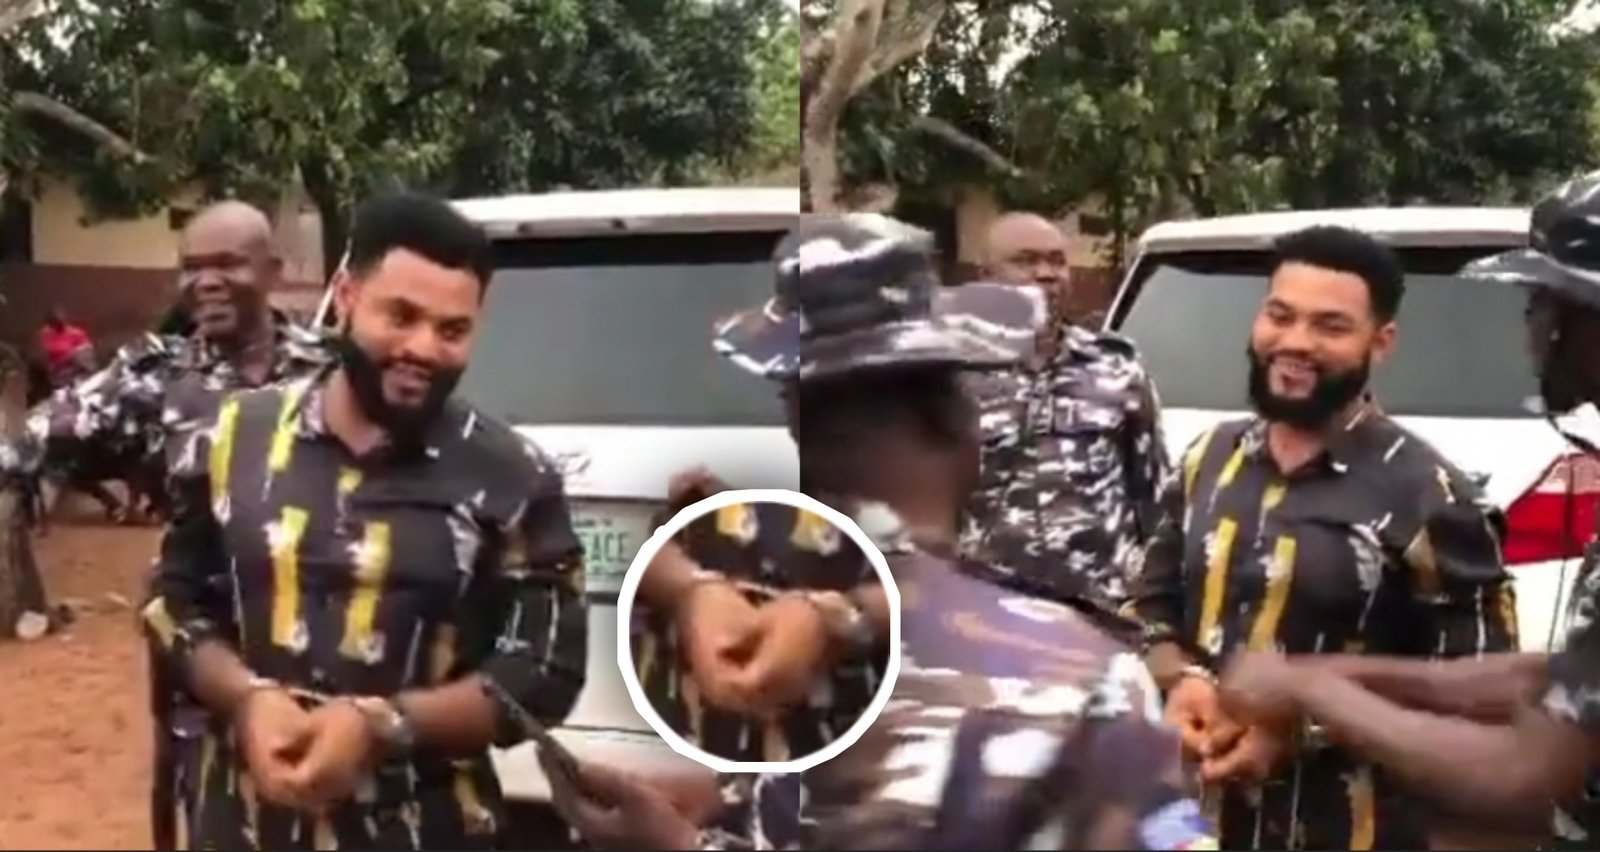 “I was just shooting a skit, Na play we dey play” – Actor Stephen says as Police arrest and Handcuffs him (VIDEO)